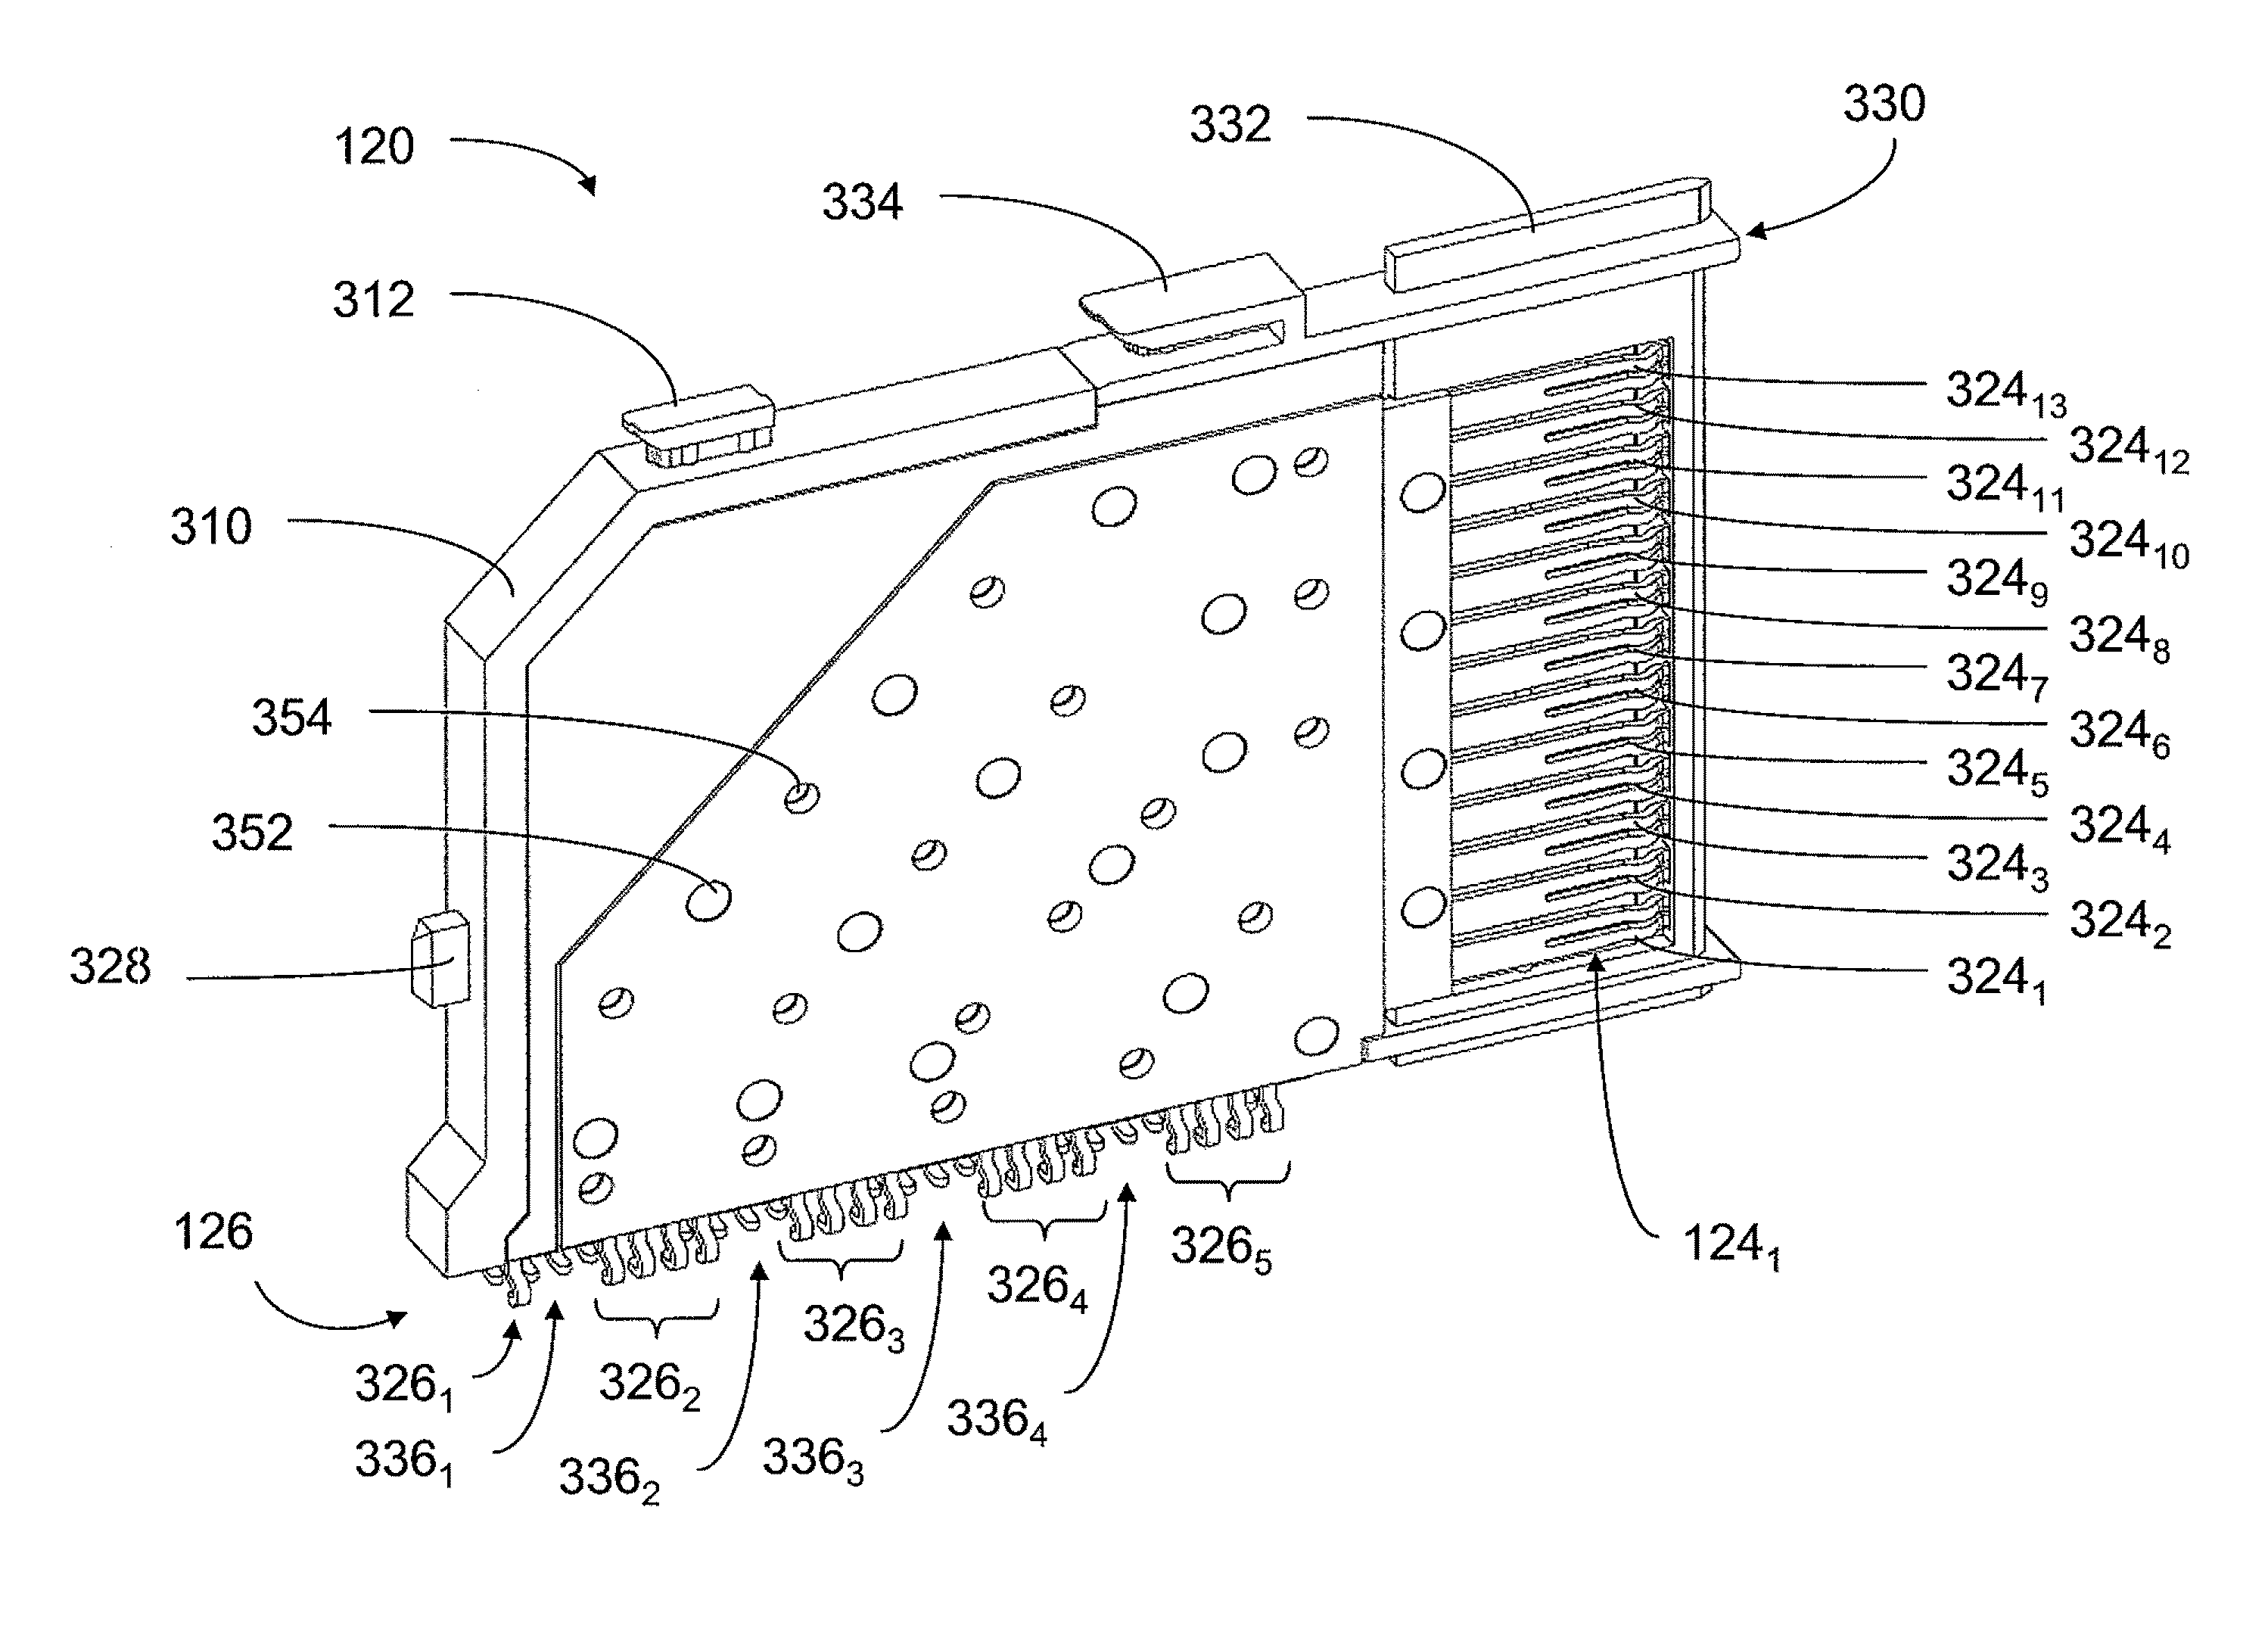 High density electrical connector with variable insertion and retention force